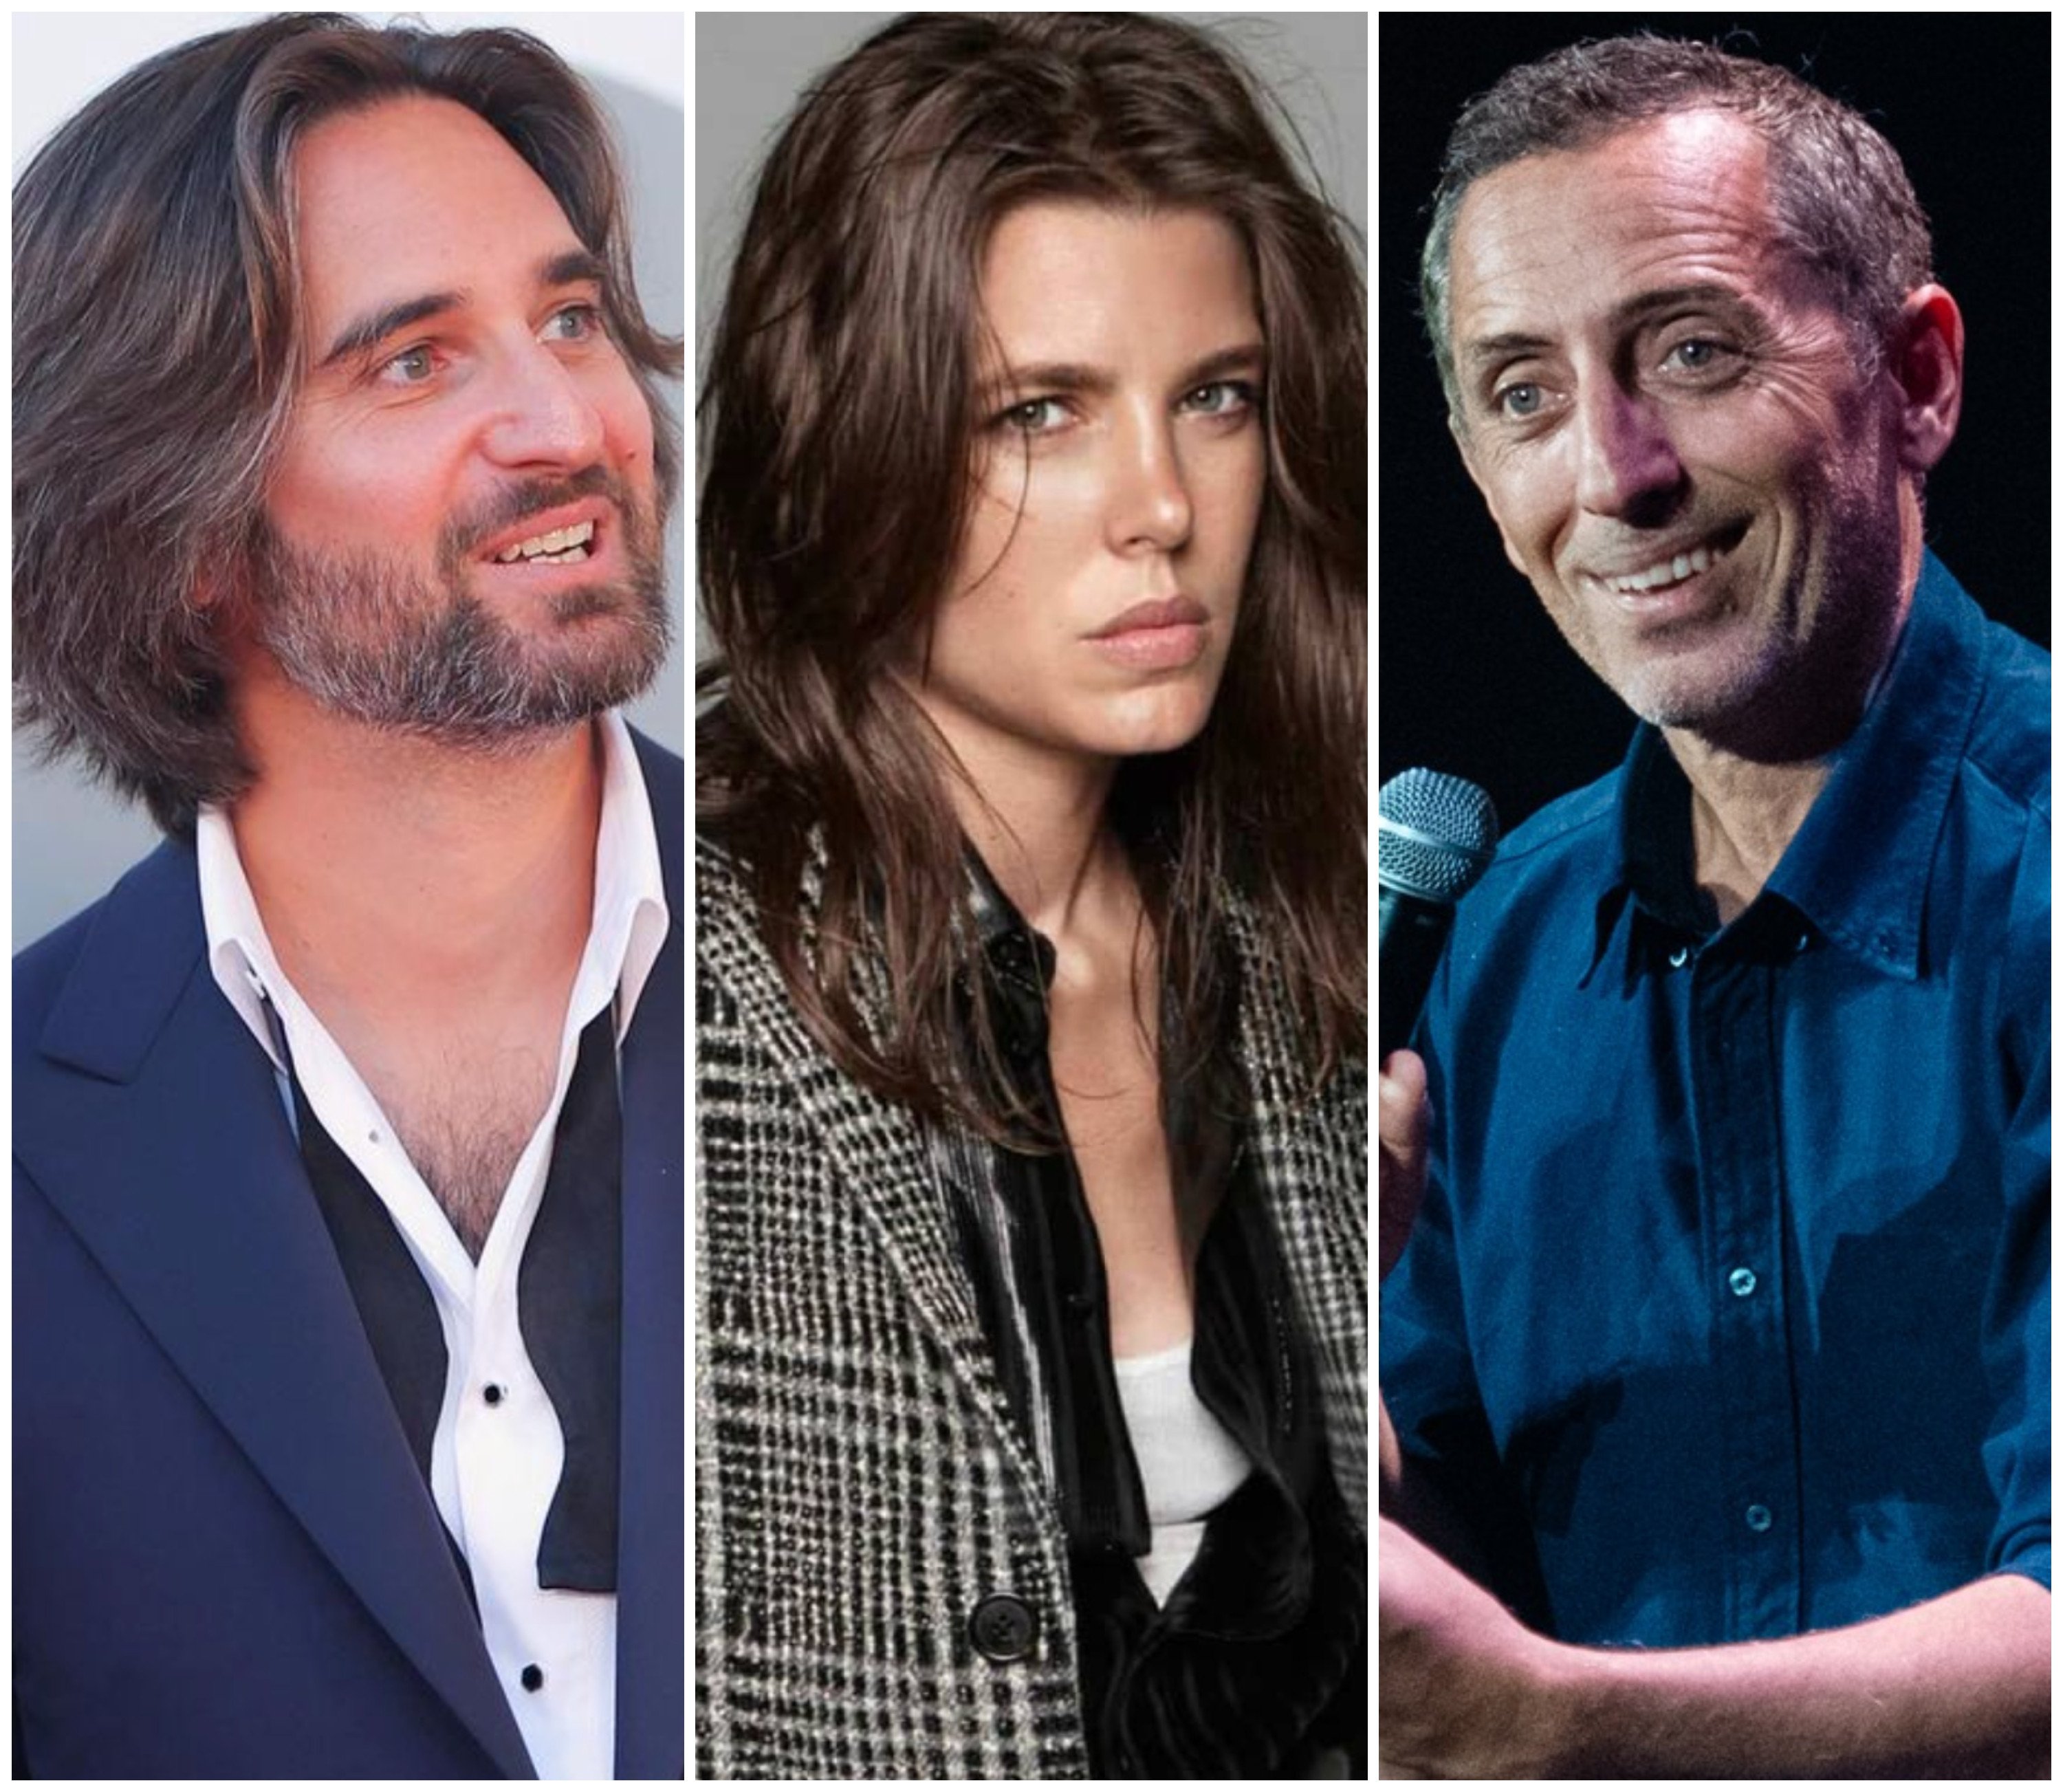 Charlotte Casiraghi (centre) of Monaco has had relationships with Dimitri Rassam (left) and Gad Elmaleh (right), among others. Photos: @dimitri_rassam, @charlottecasiraghi/Instagram; Directo Prod/Facebook